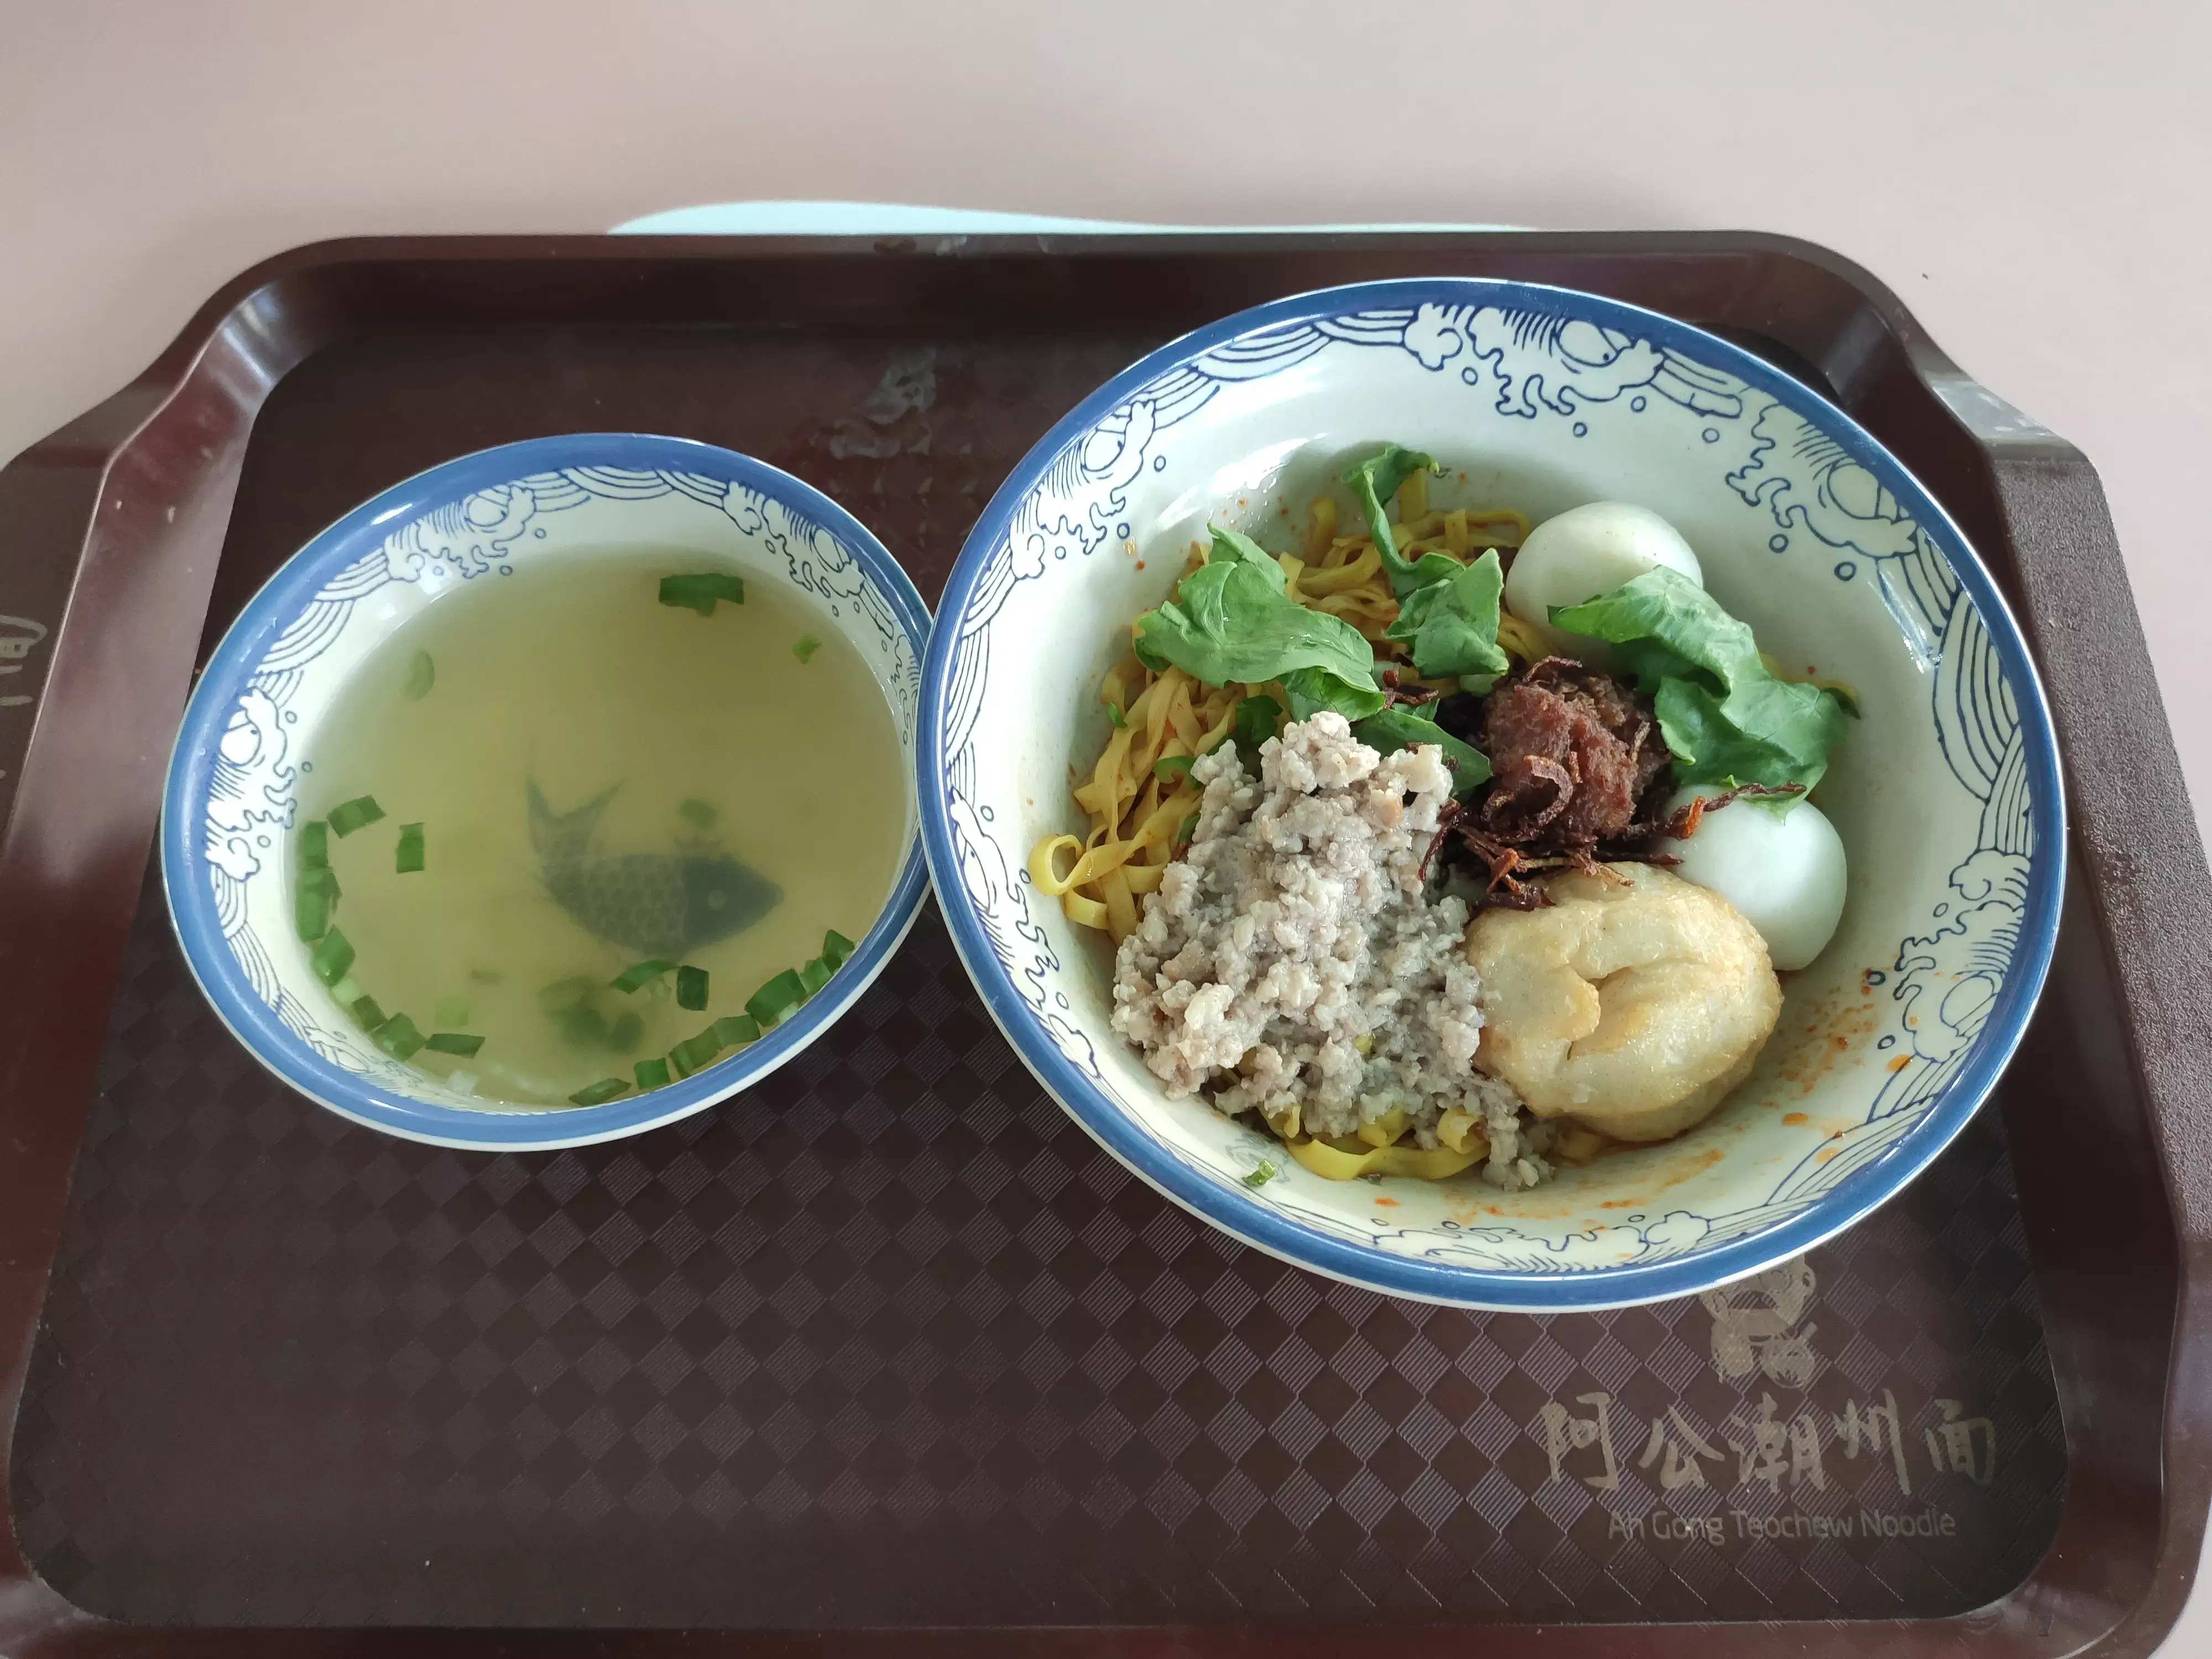 Review: Ah Gong Teochew Noodle (Singapore)